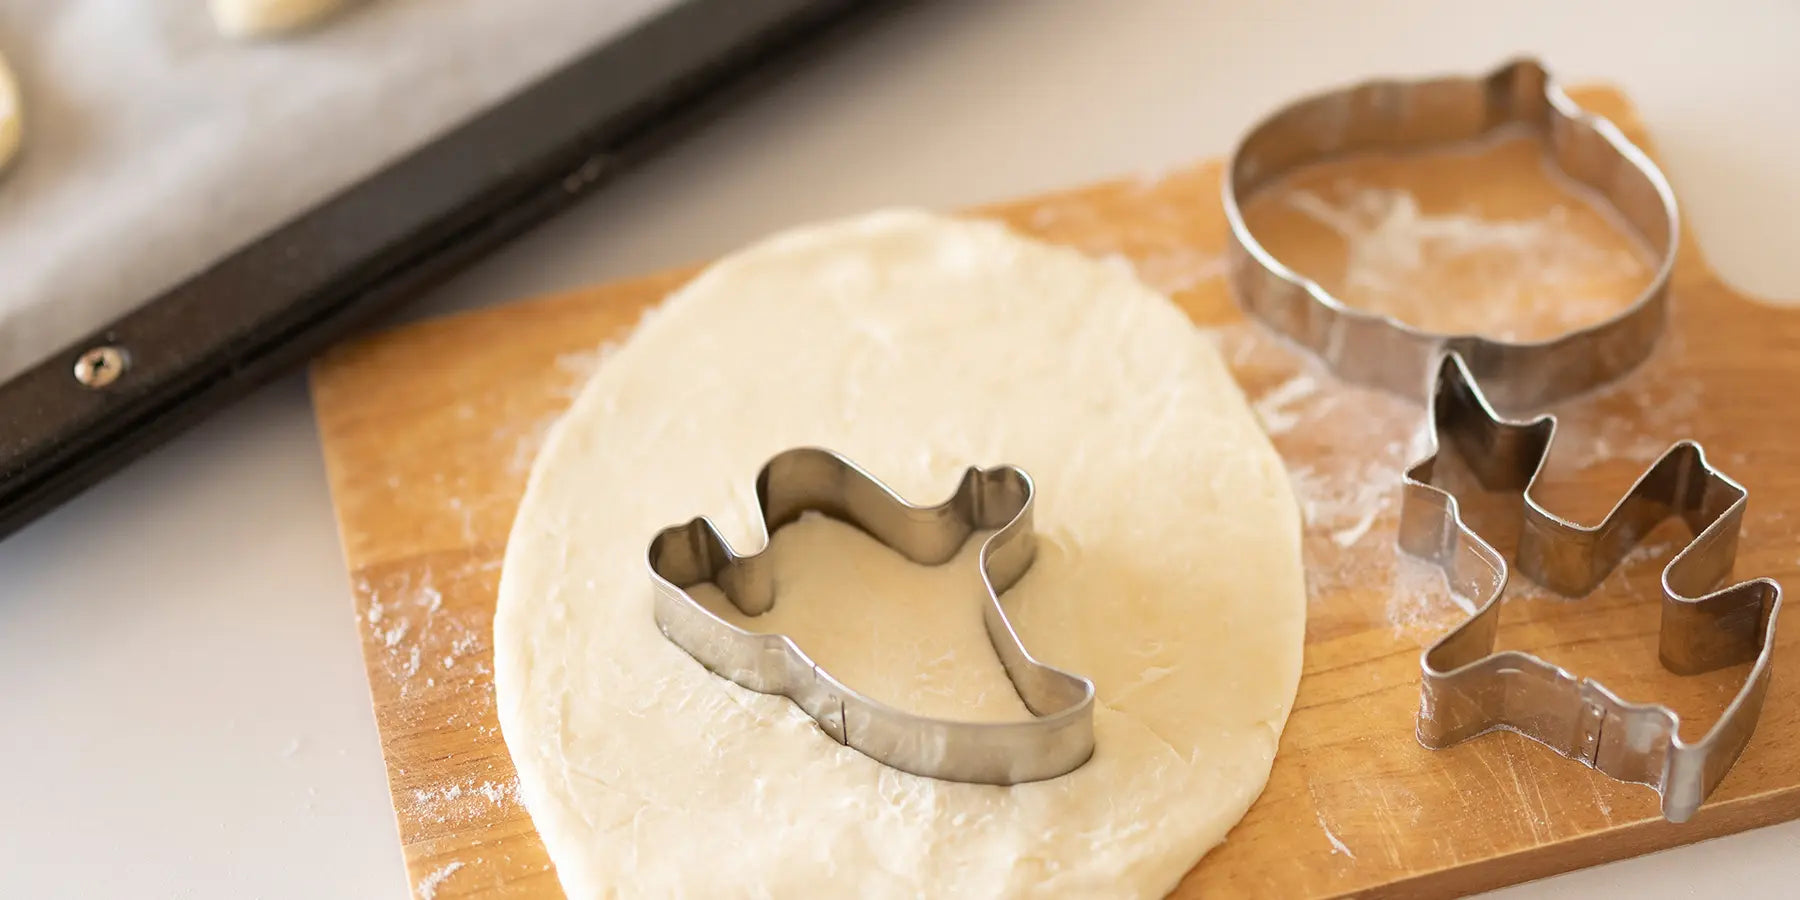 Discover our great selection of Cookie Cutters at Globalkitchen Japan.